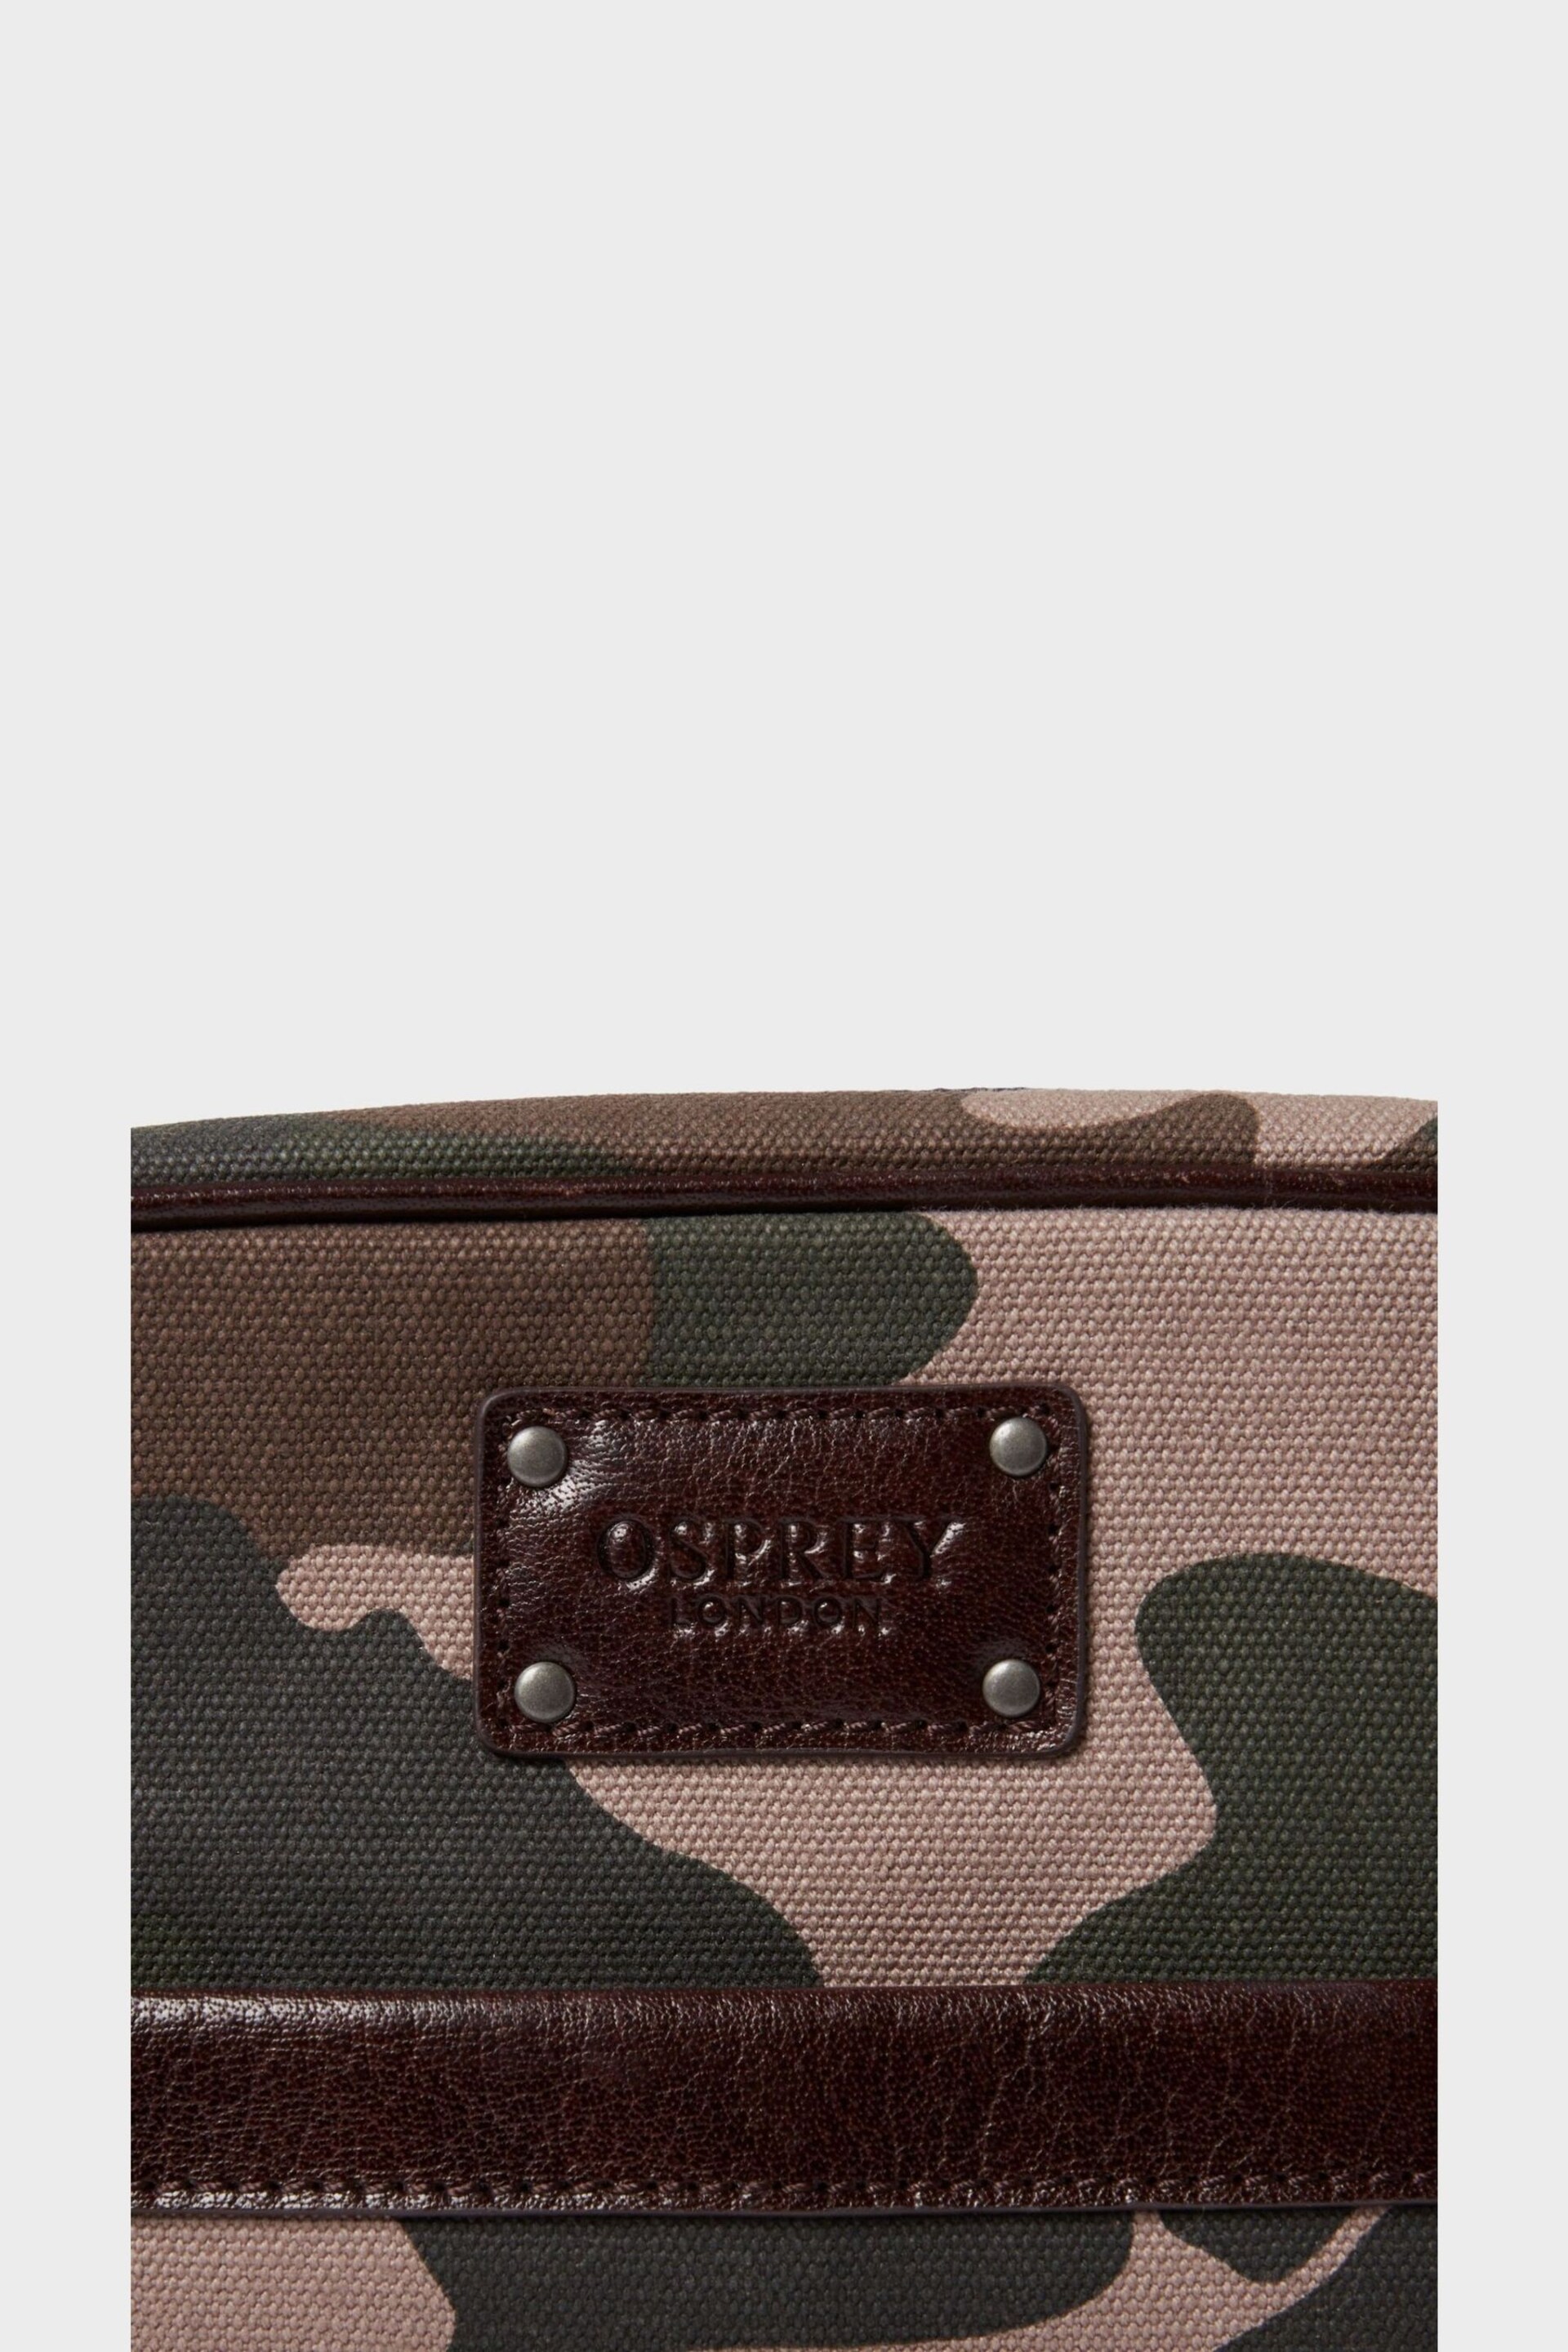 OSPREY LONDON Green The Maverick Small Canvas and Leather Messenger Bag - Image 5 of 5